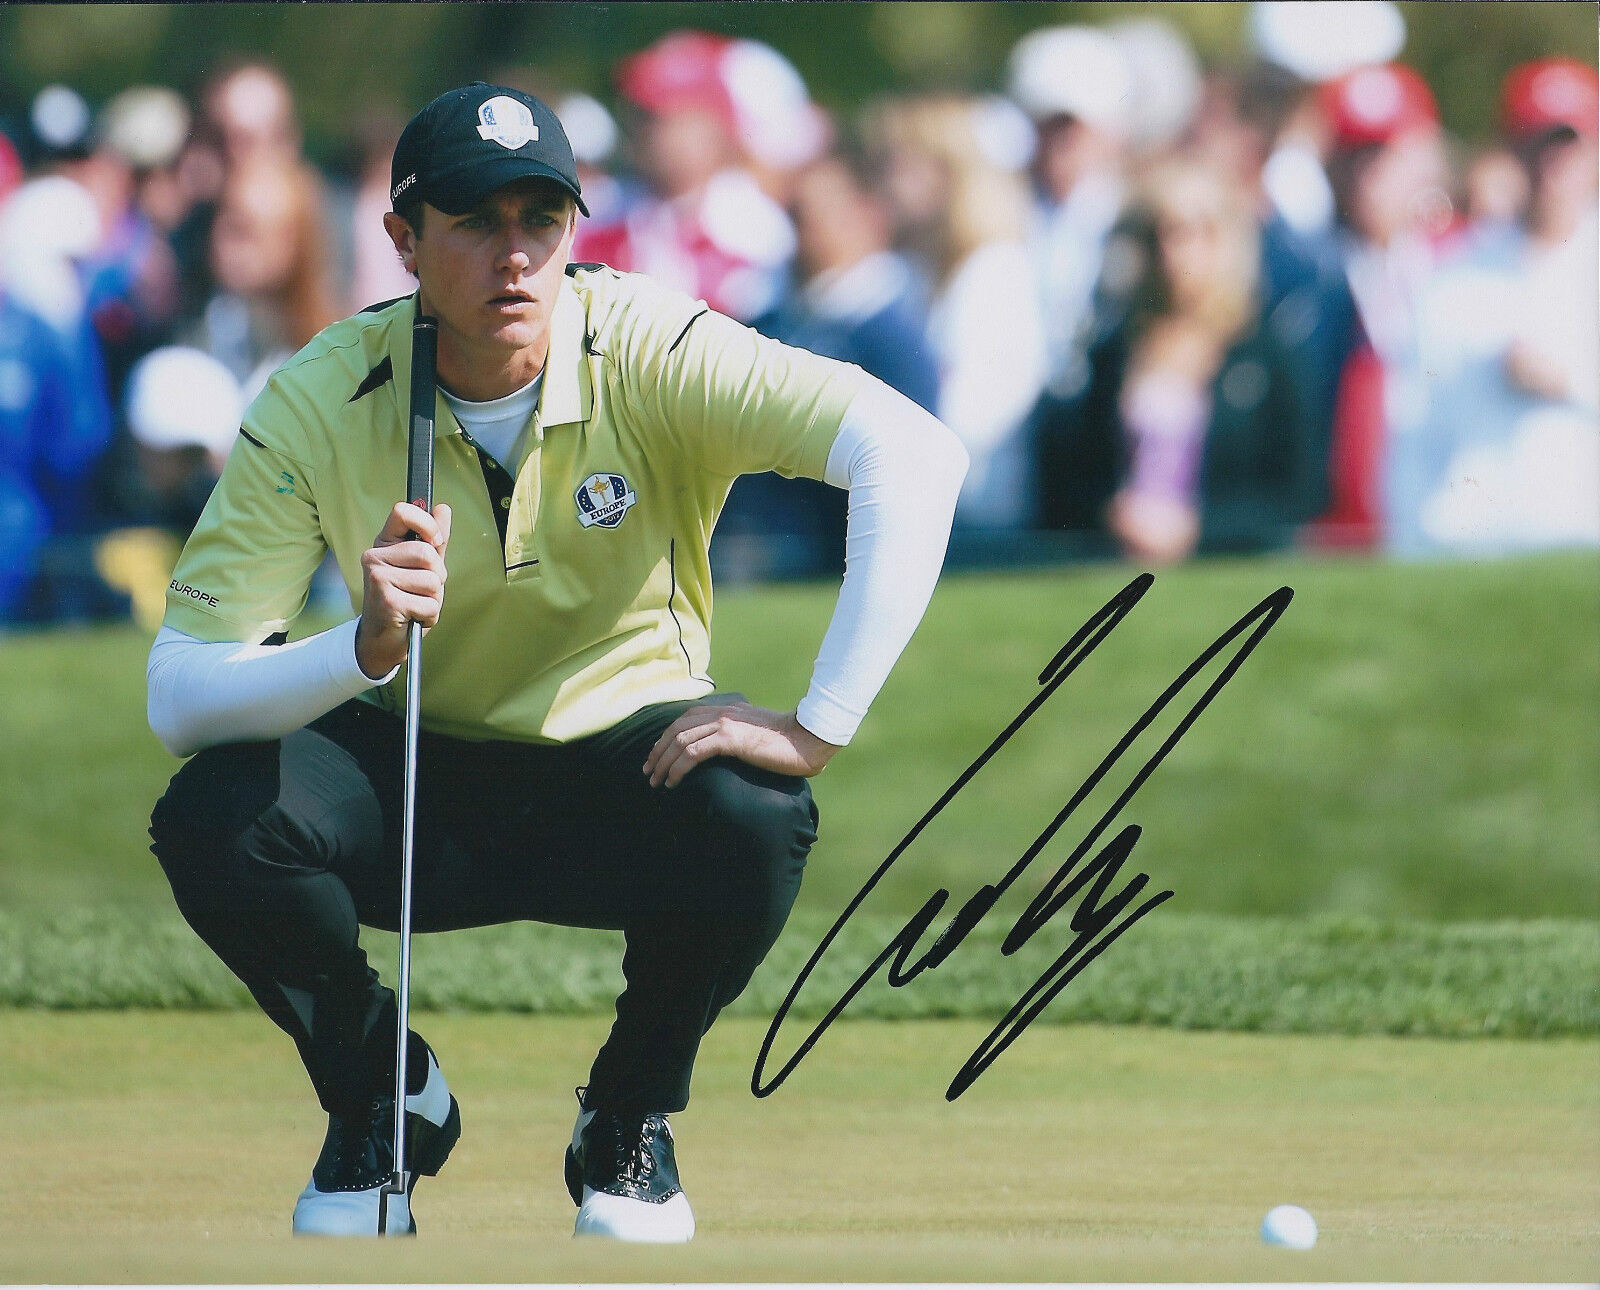 Nicolas COLSAERTS SIGNED Autograph 10x8 Photo Poster painting AFTAL COA Ryder Cup Team EUROPE